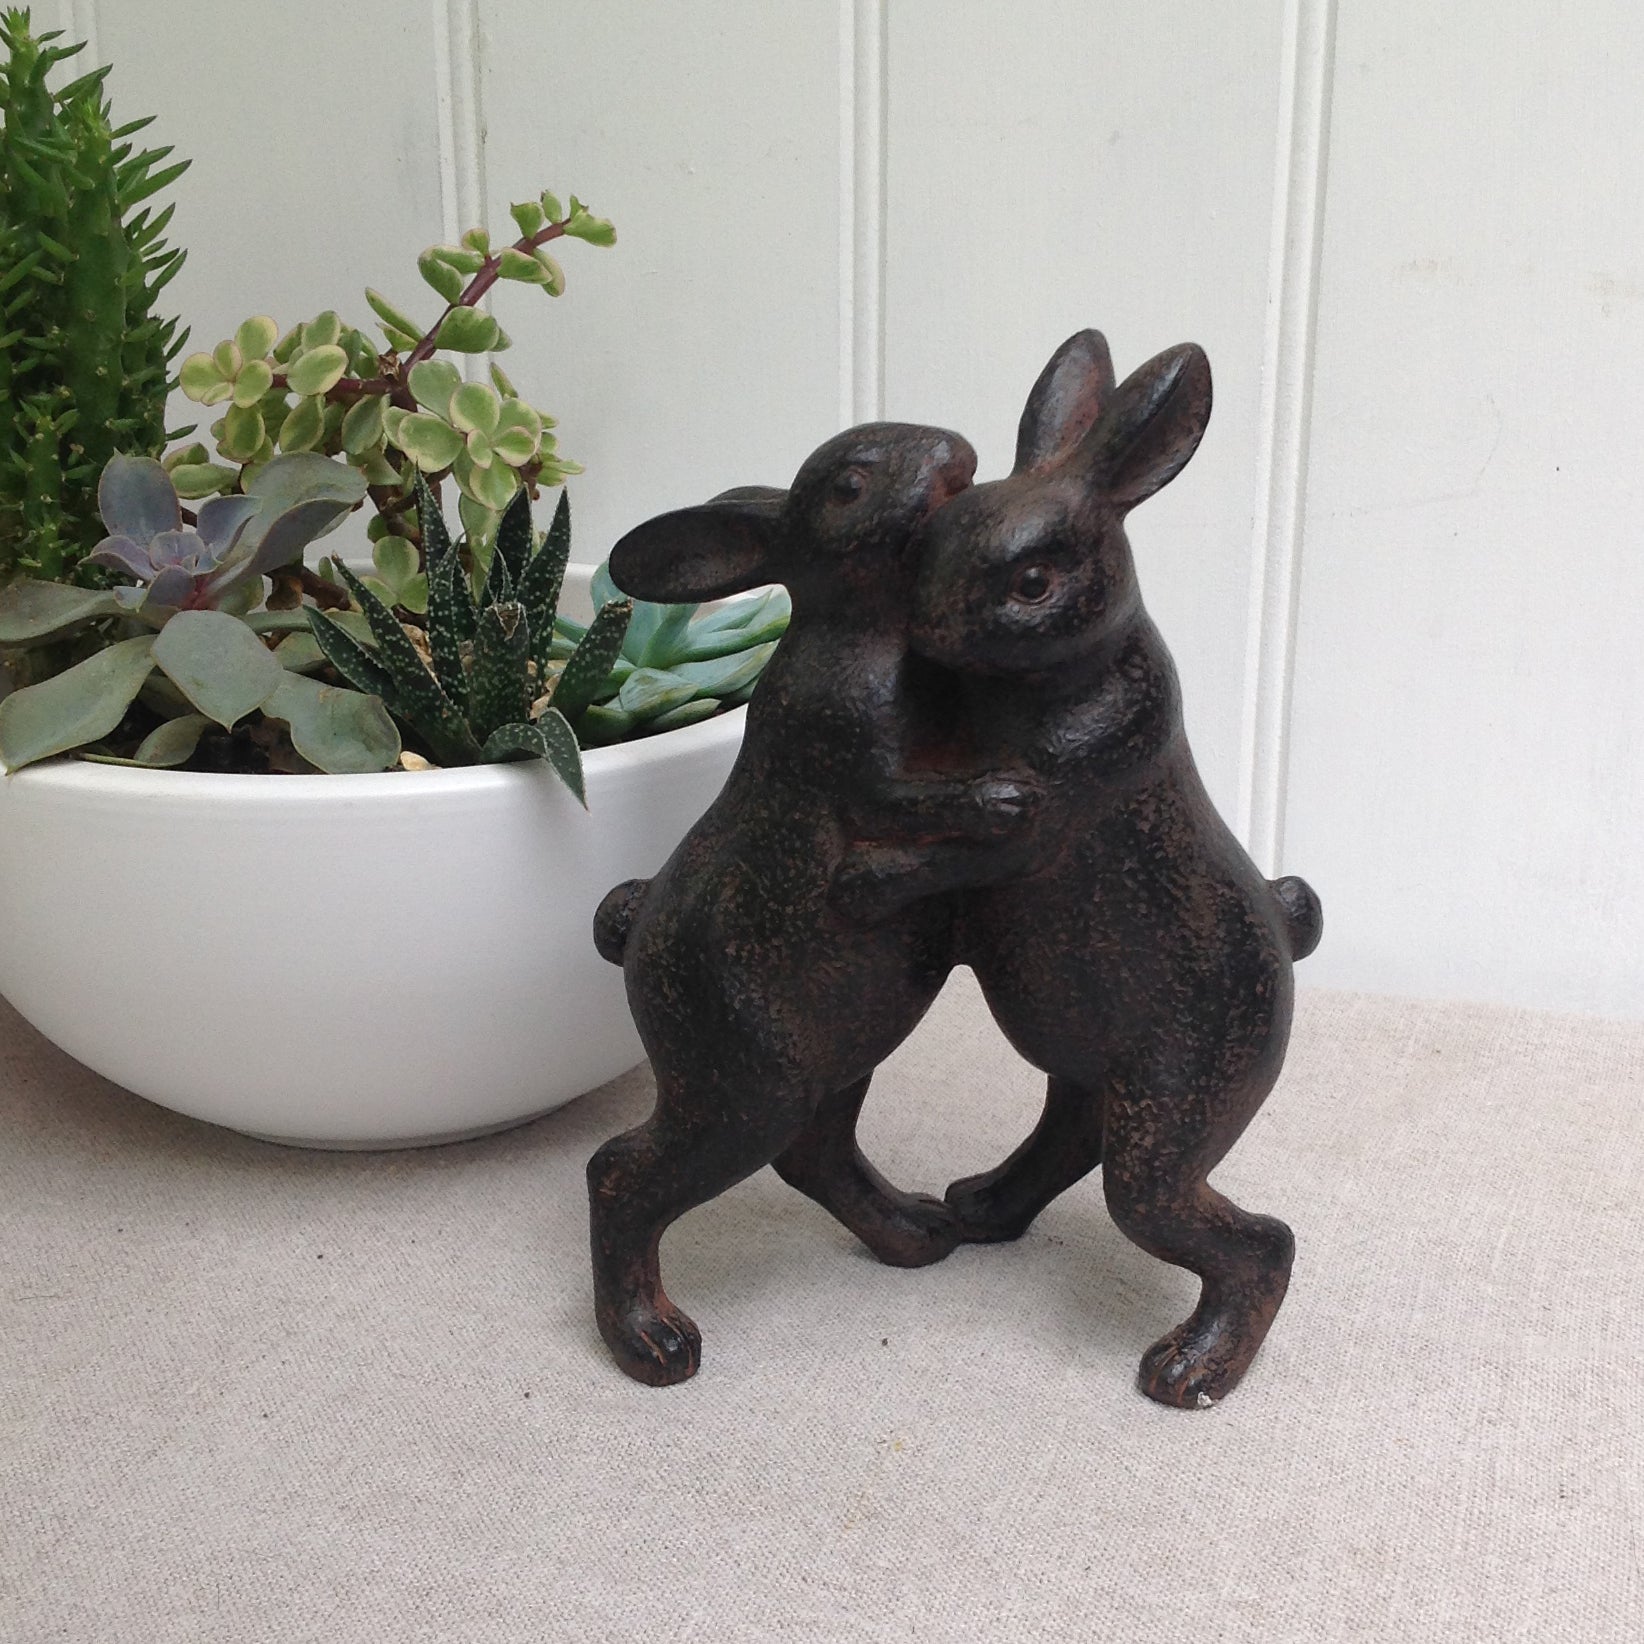 Home decoration- Two rabbits dancing ornament